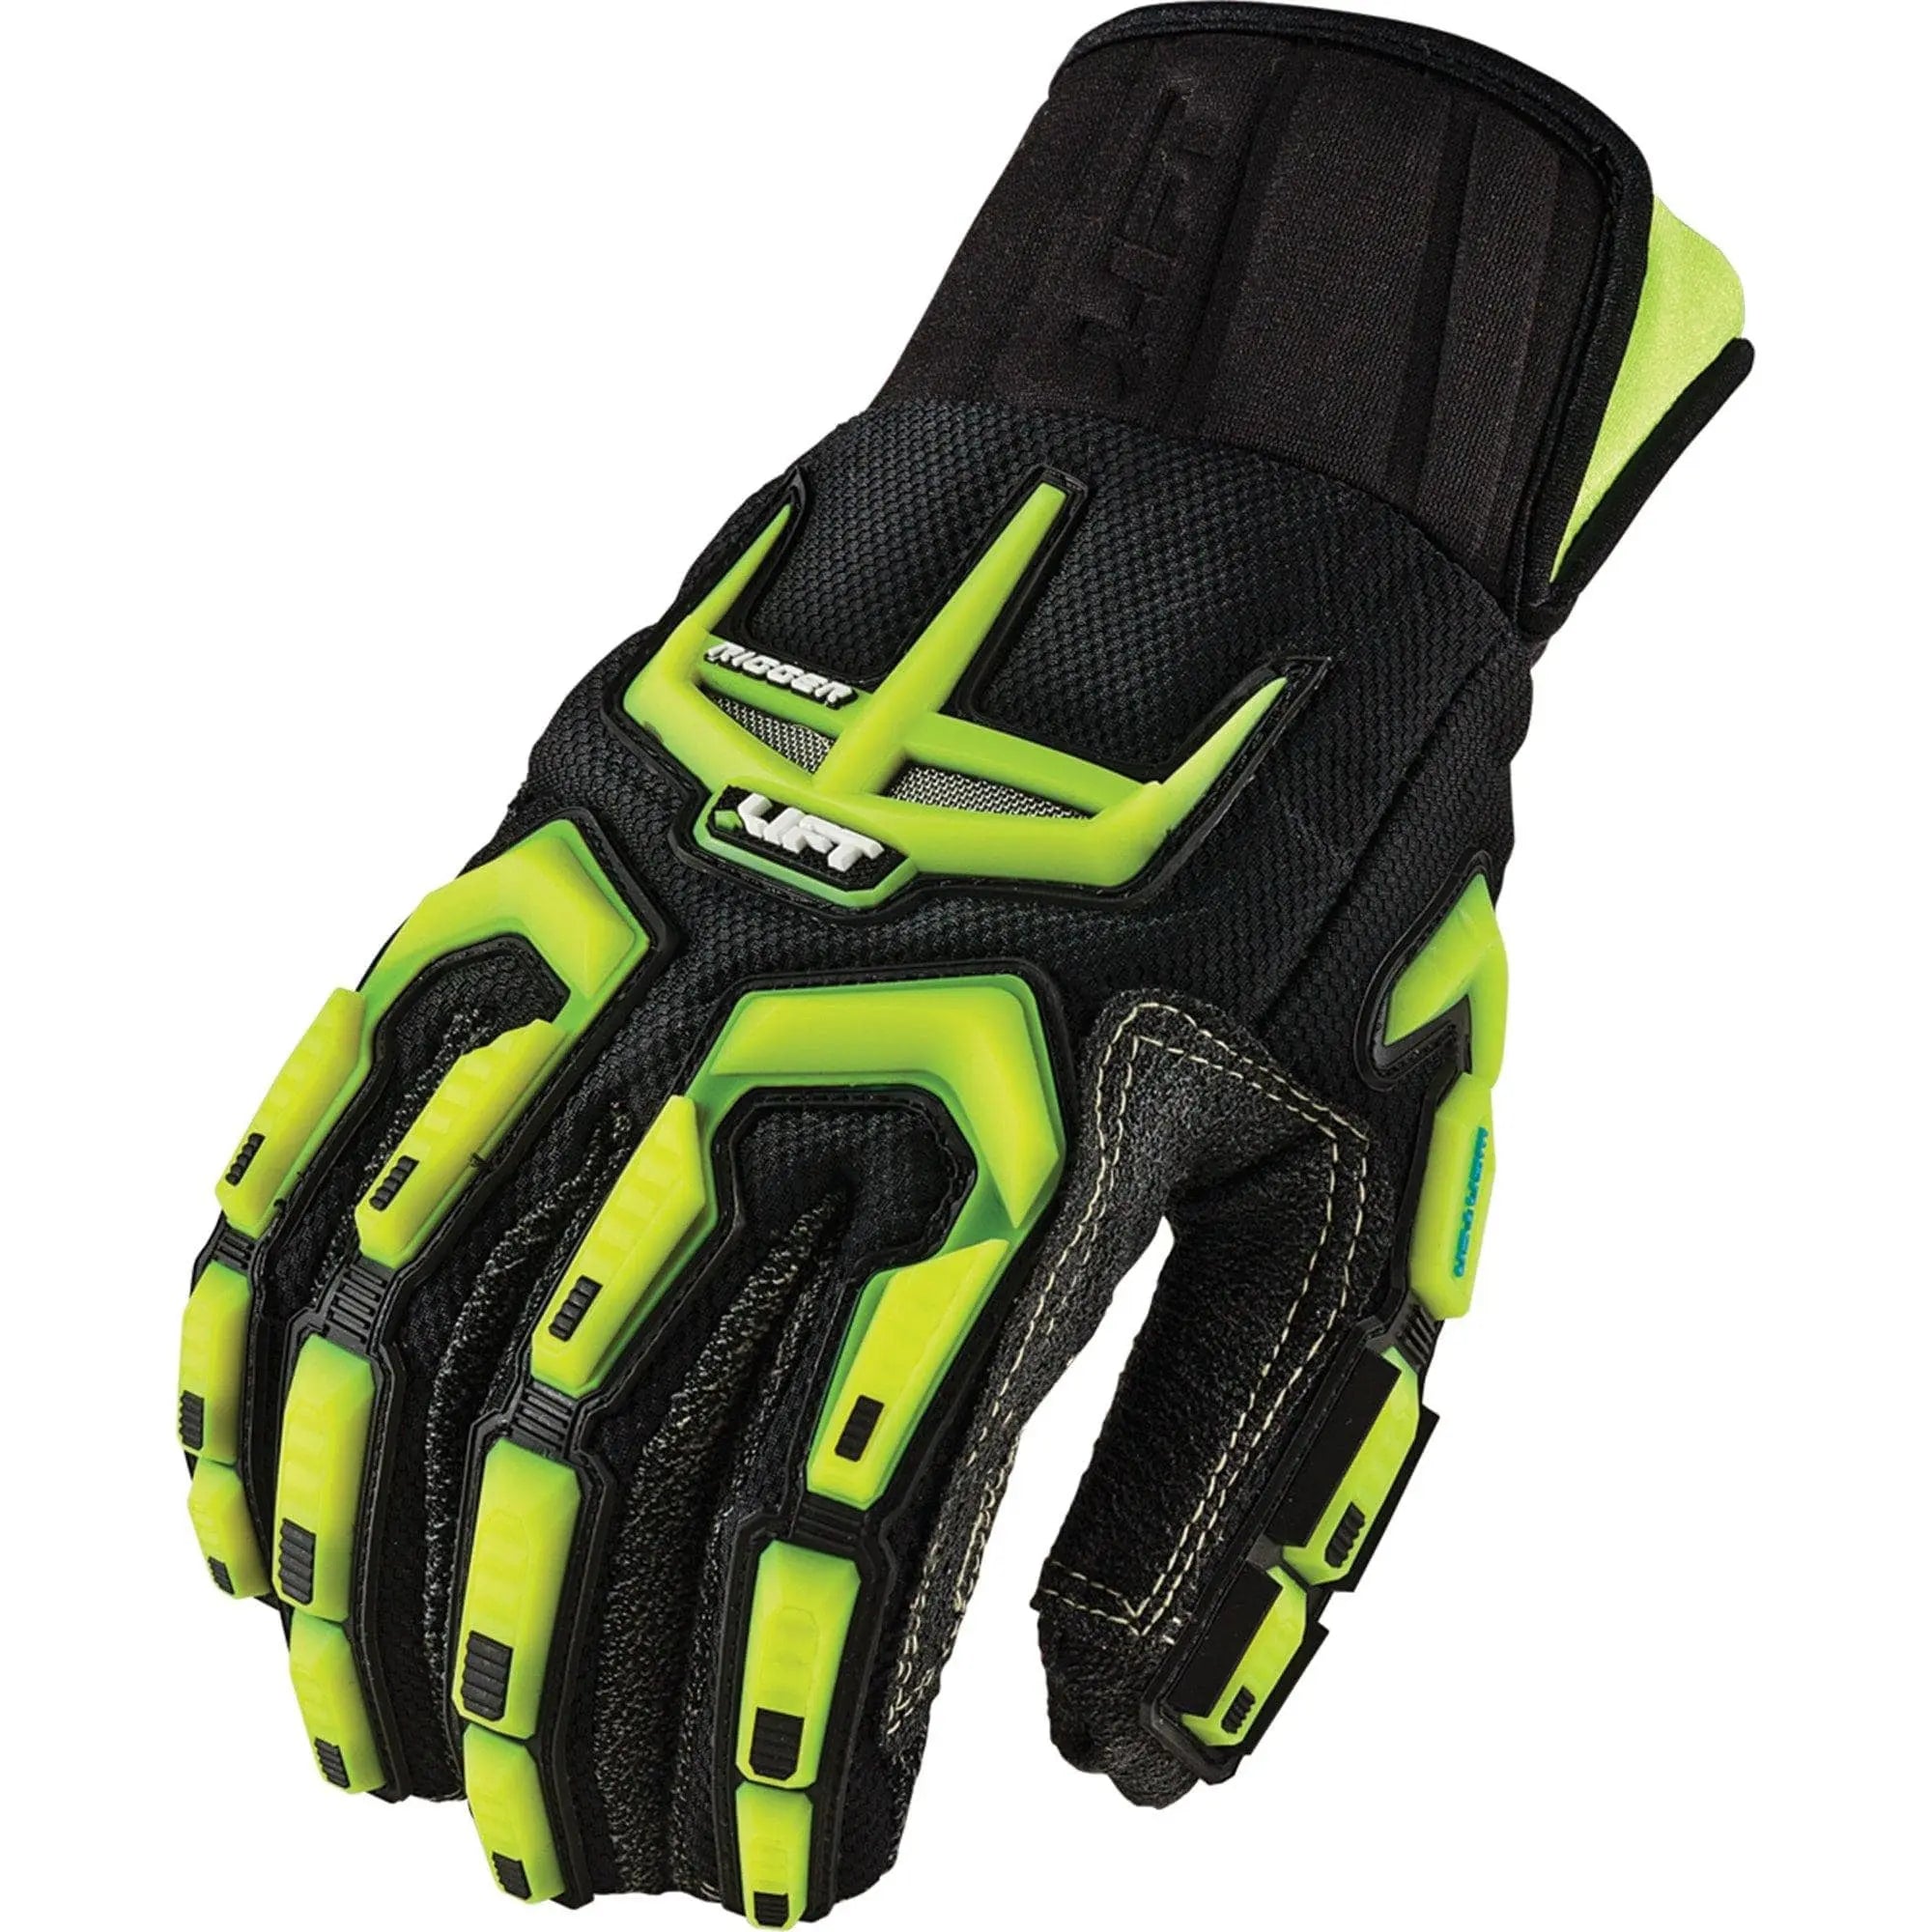 LIFT -  Rigger Winter Rated Glove - Becker Safety and Supply